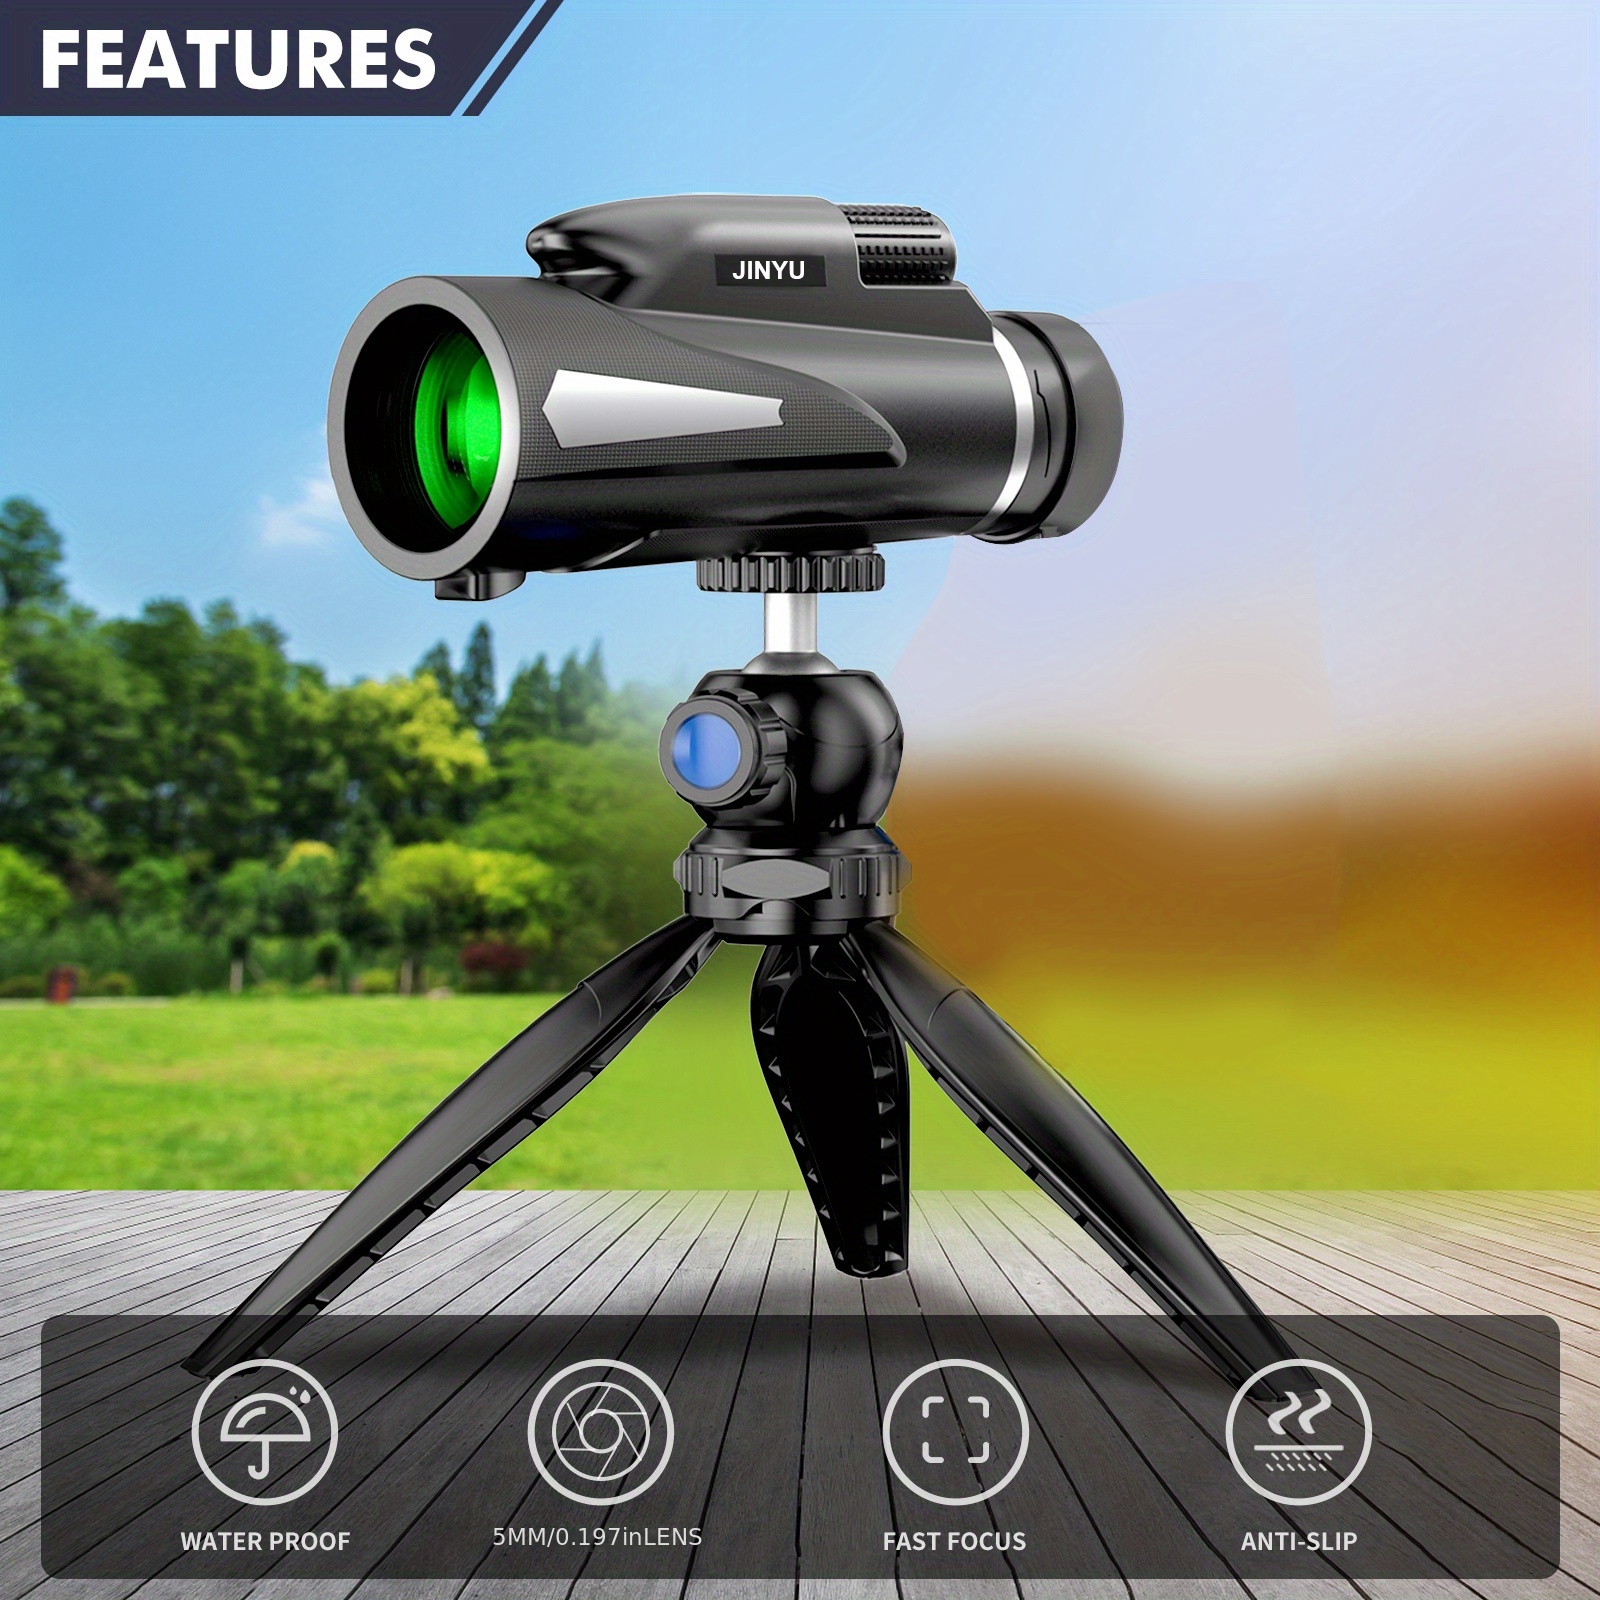 jinyu new high end 12x50 adult hd monocular with smartphone adapter tripod hand strap lightweight high power bak4 prism and fmc lens monocular for bird watching camping hunting hiking traveling details 1